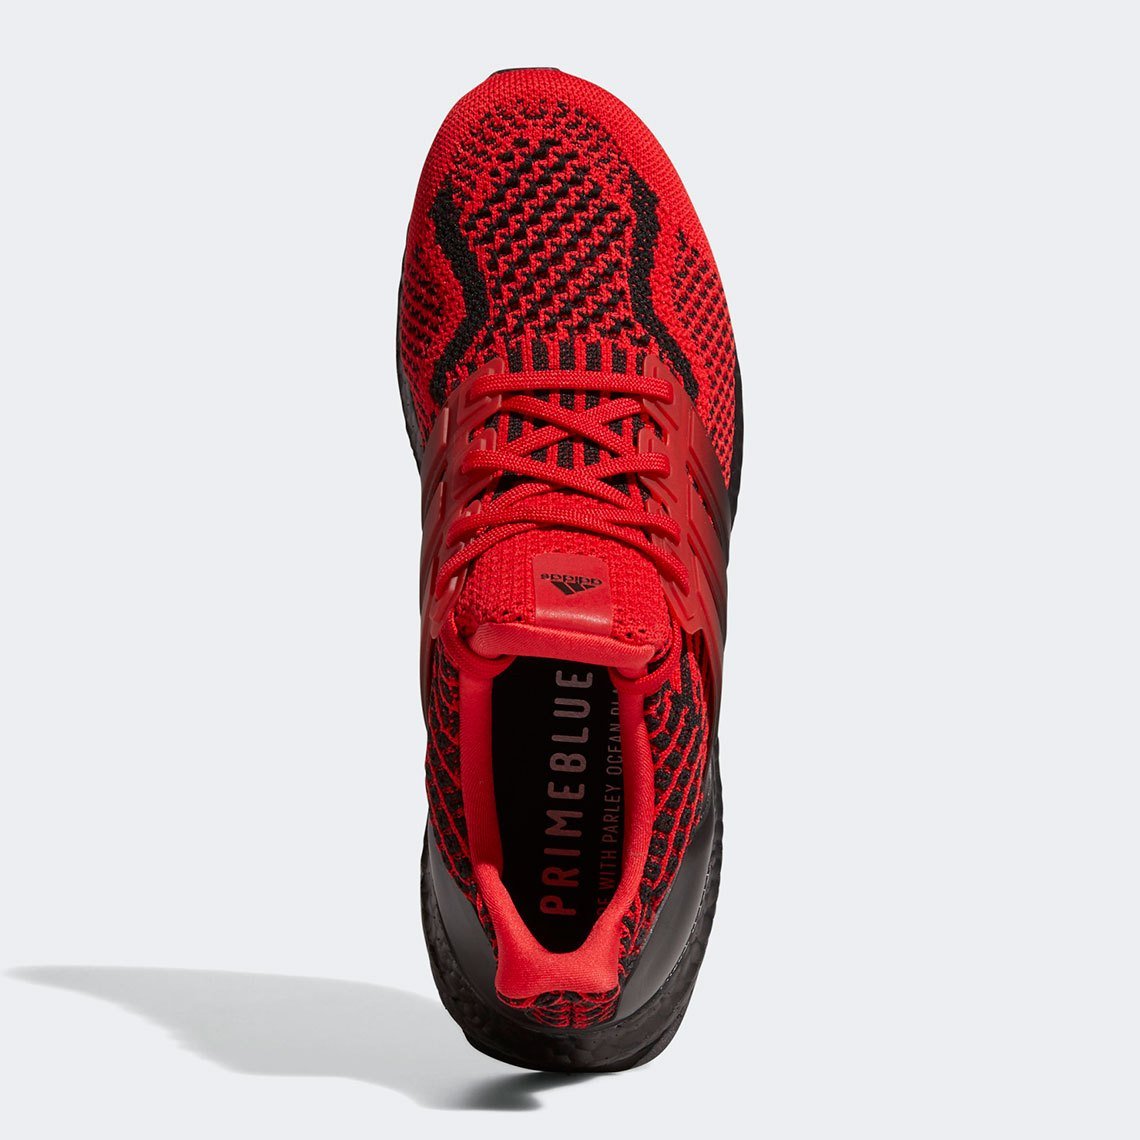 adidas Ultra Boost 5.0 DNA "Scarlet-Core Black"